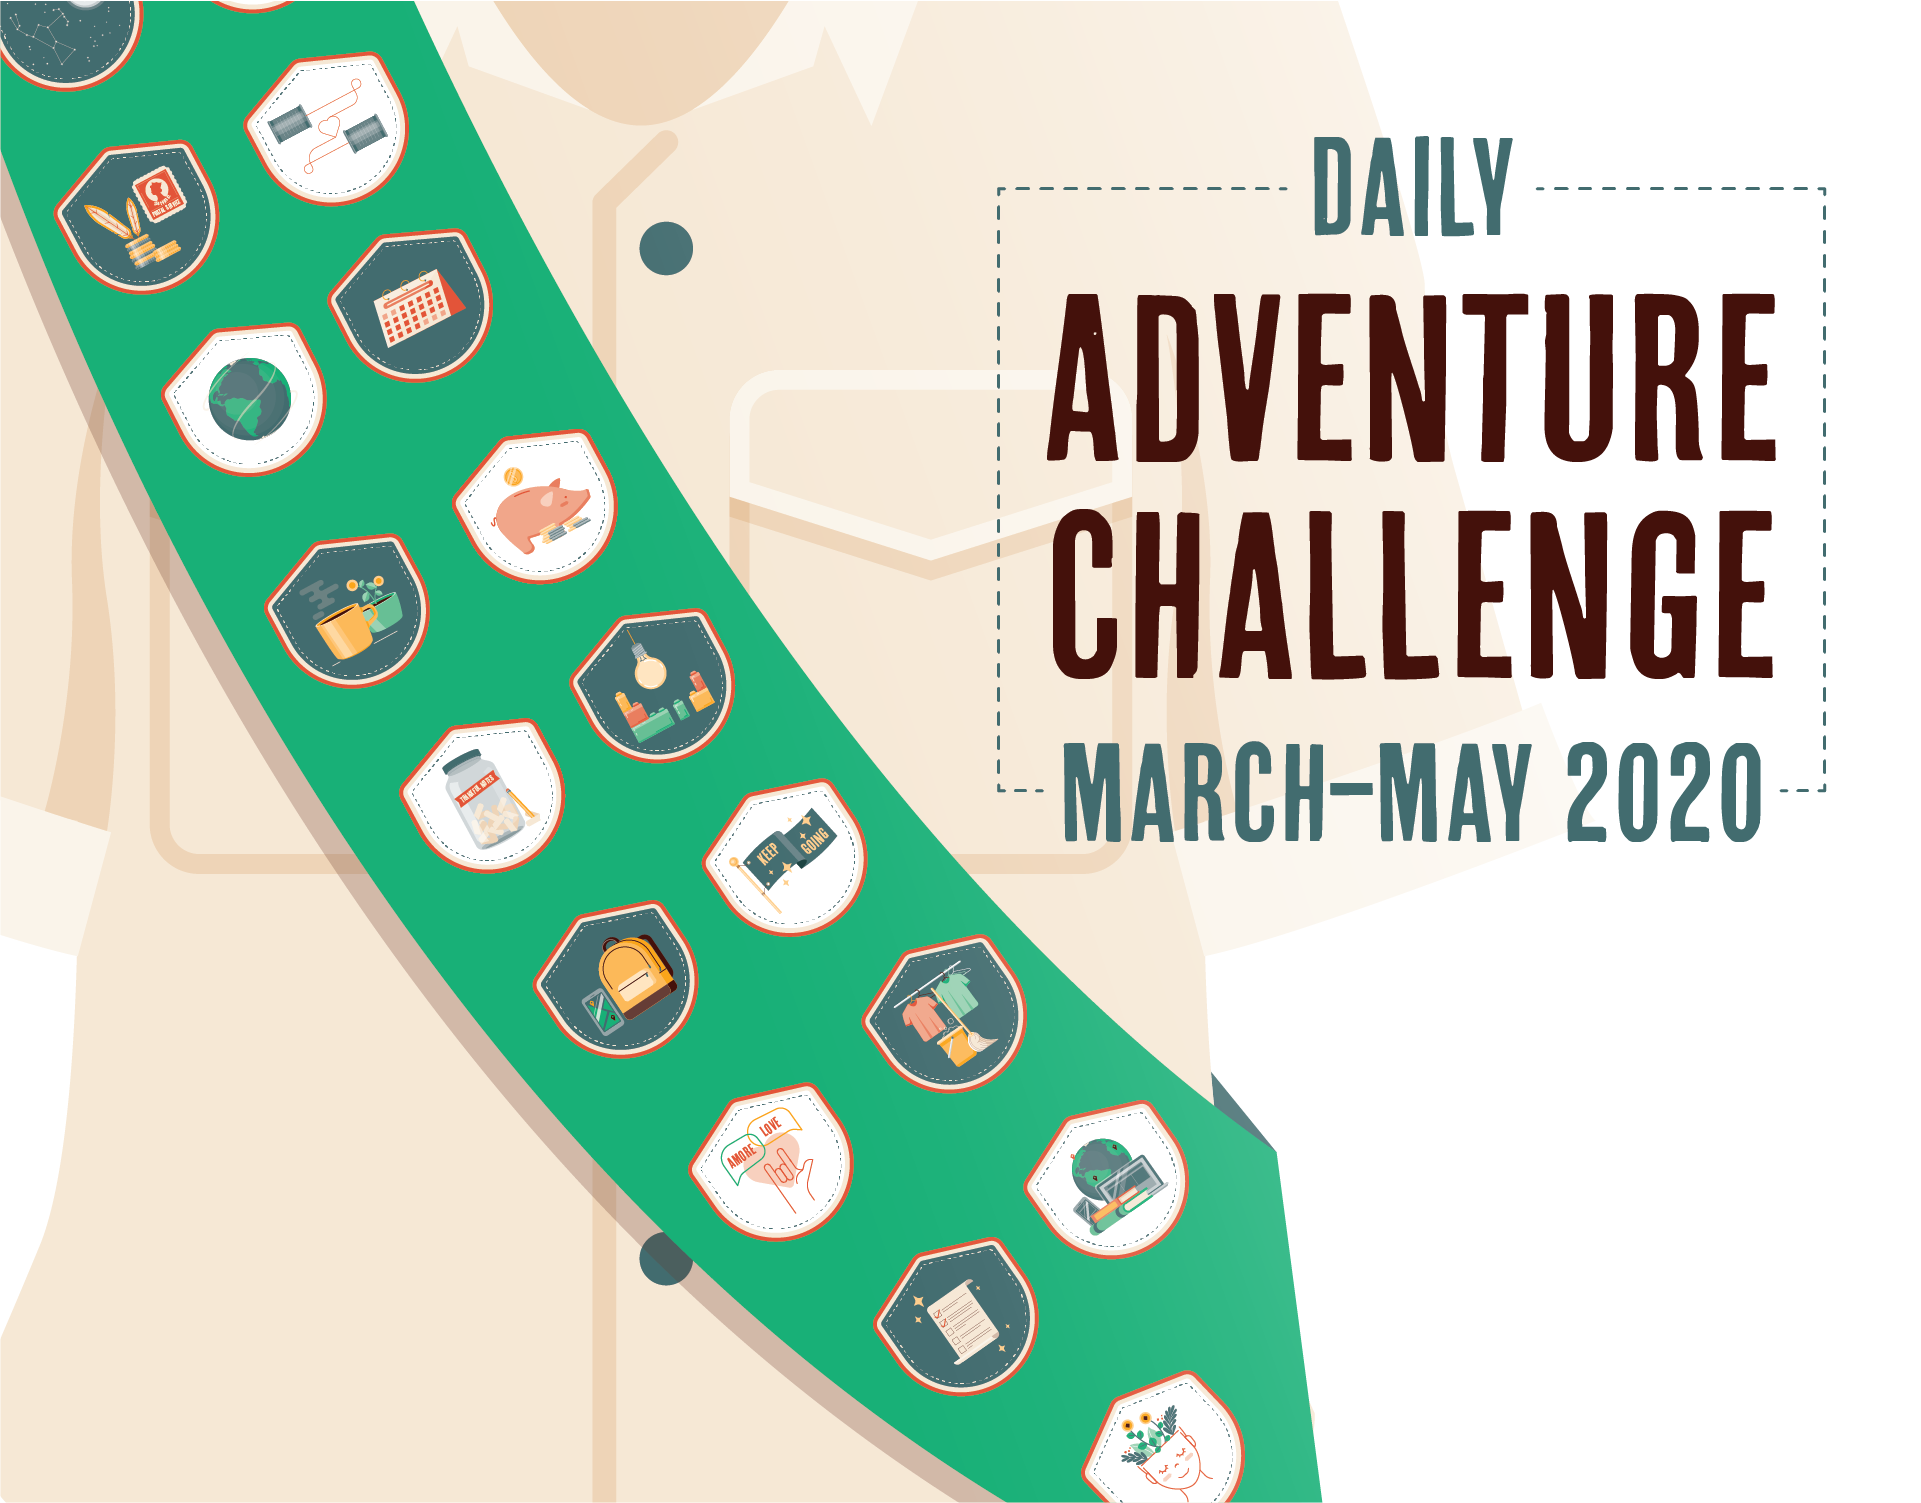 Daily Adventure Challenge. March-May 2020